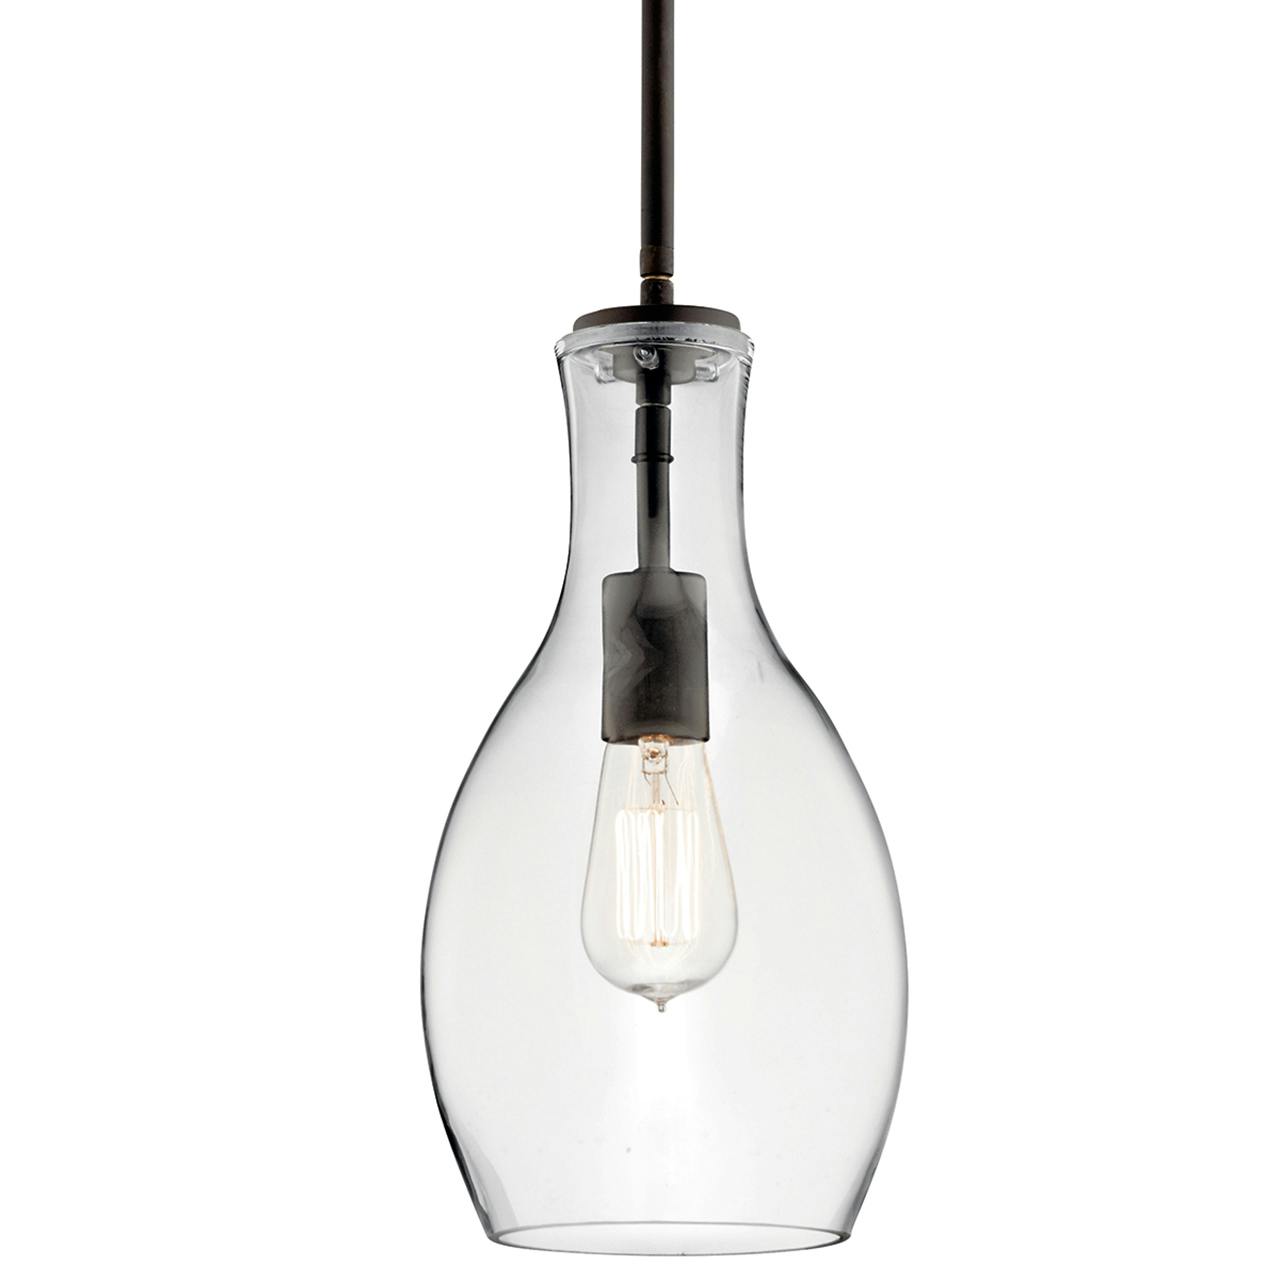 Everly 13.75" Pendant Clear Glass Bronze without the canopy on a white background